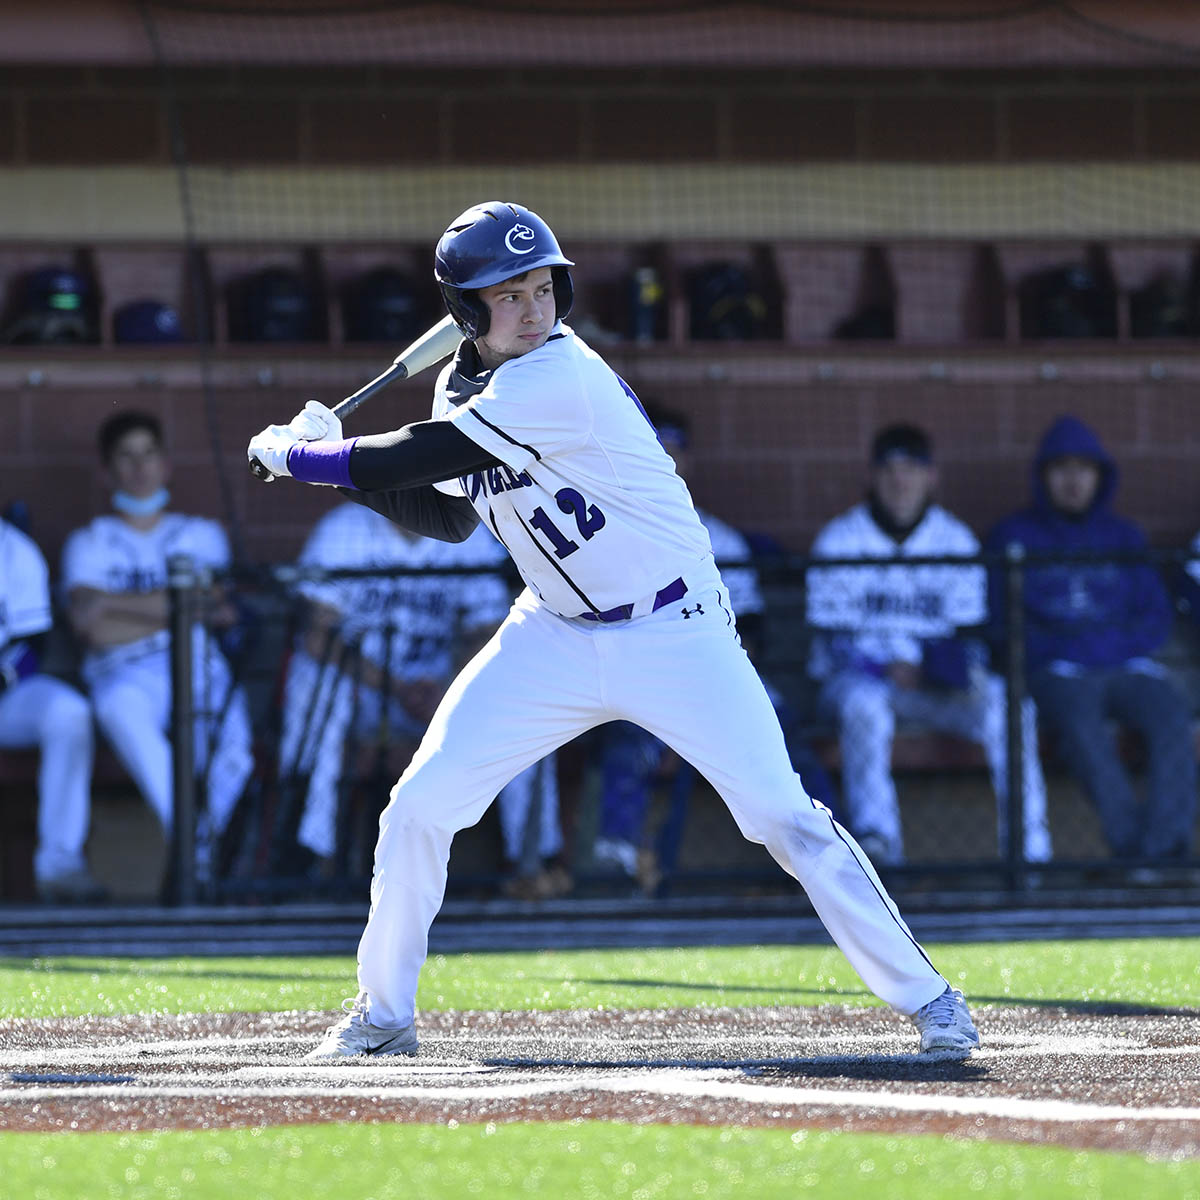 Photo of a young male student in a Chatham baseball uniform at bat